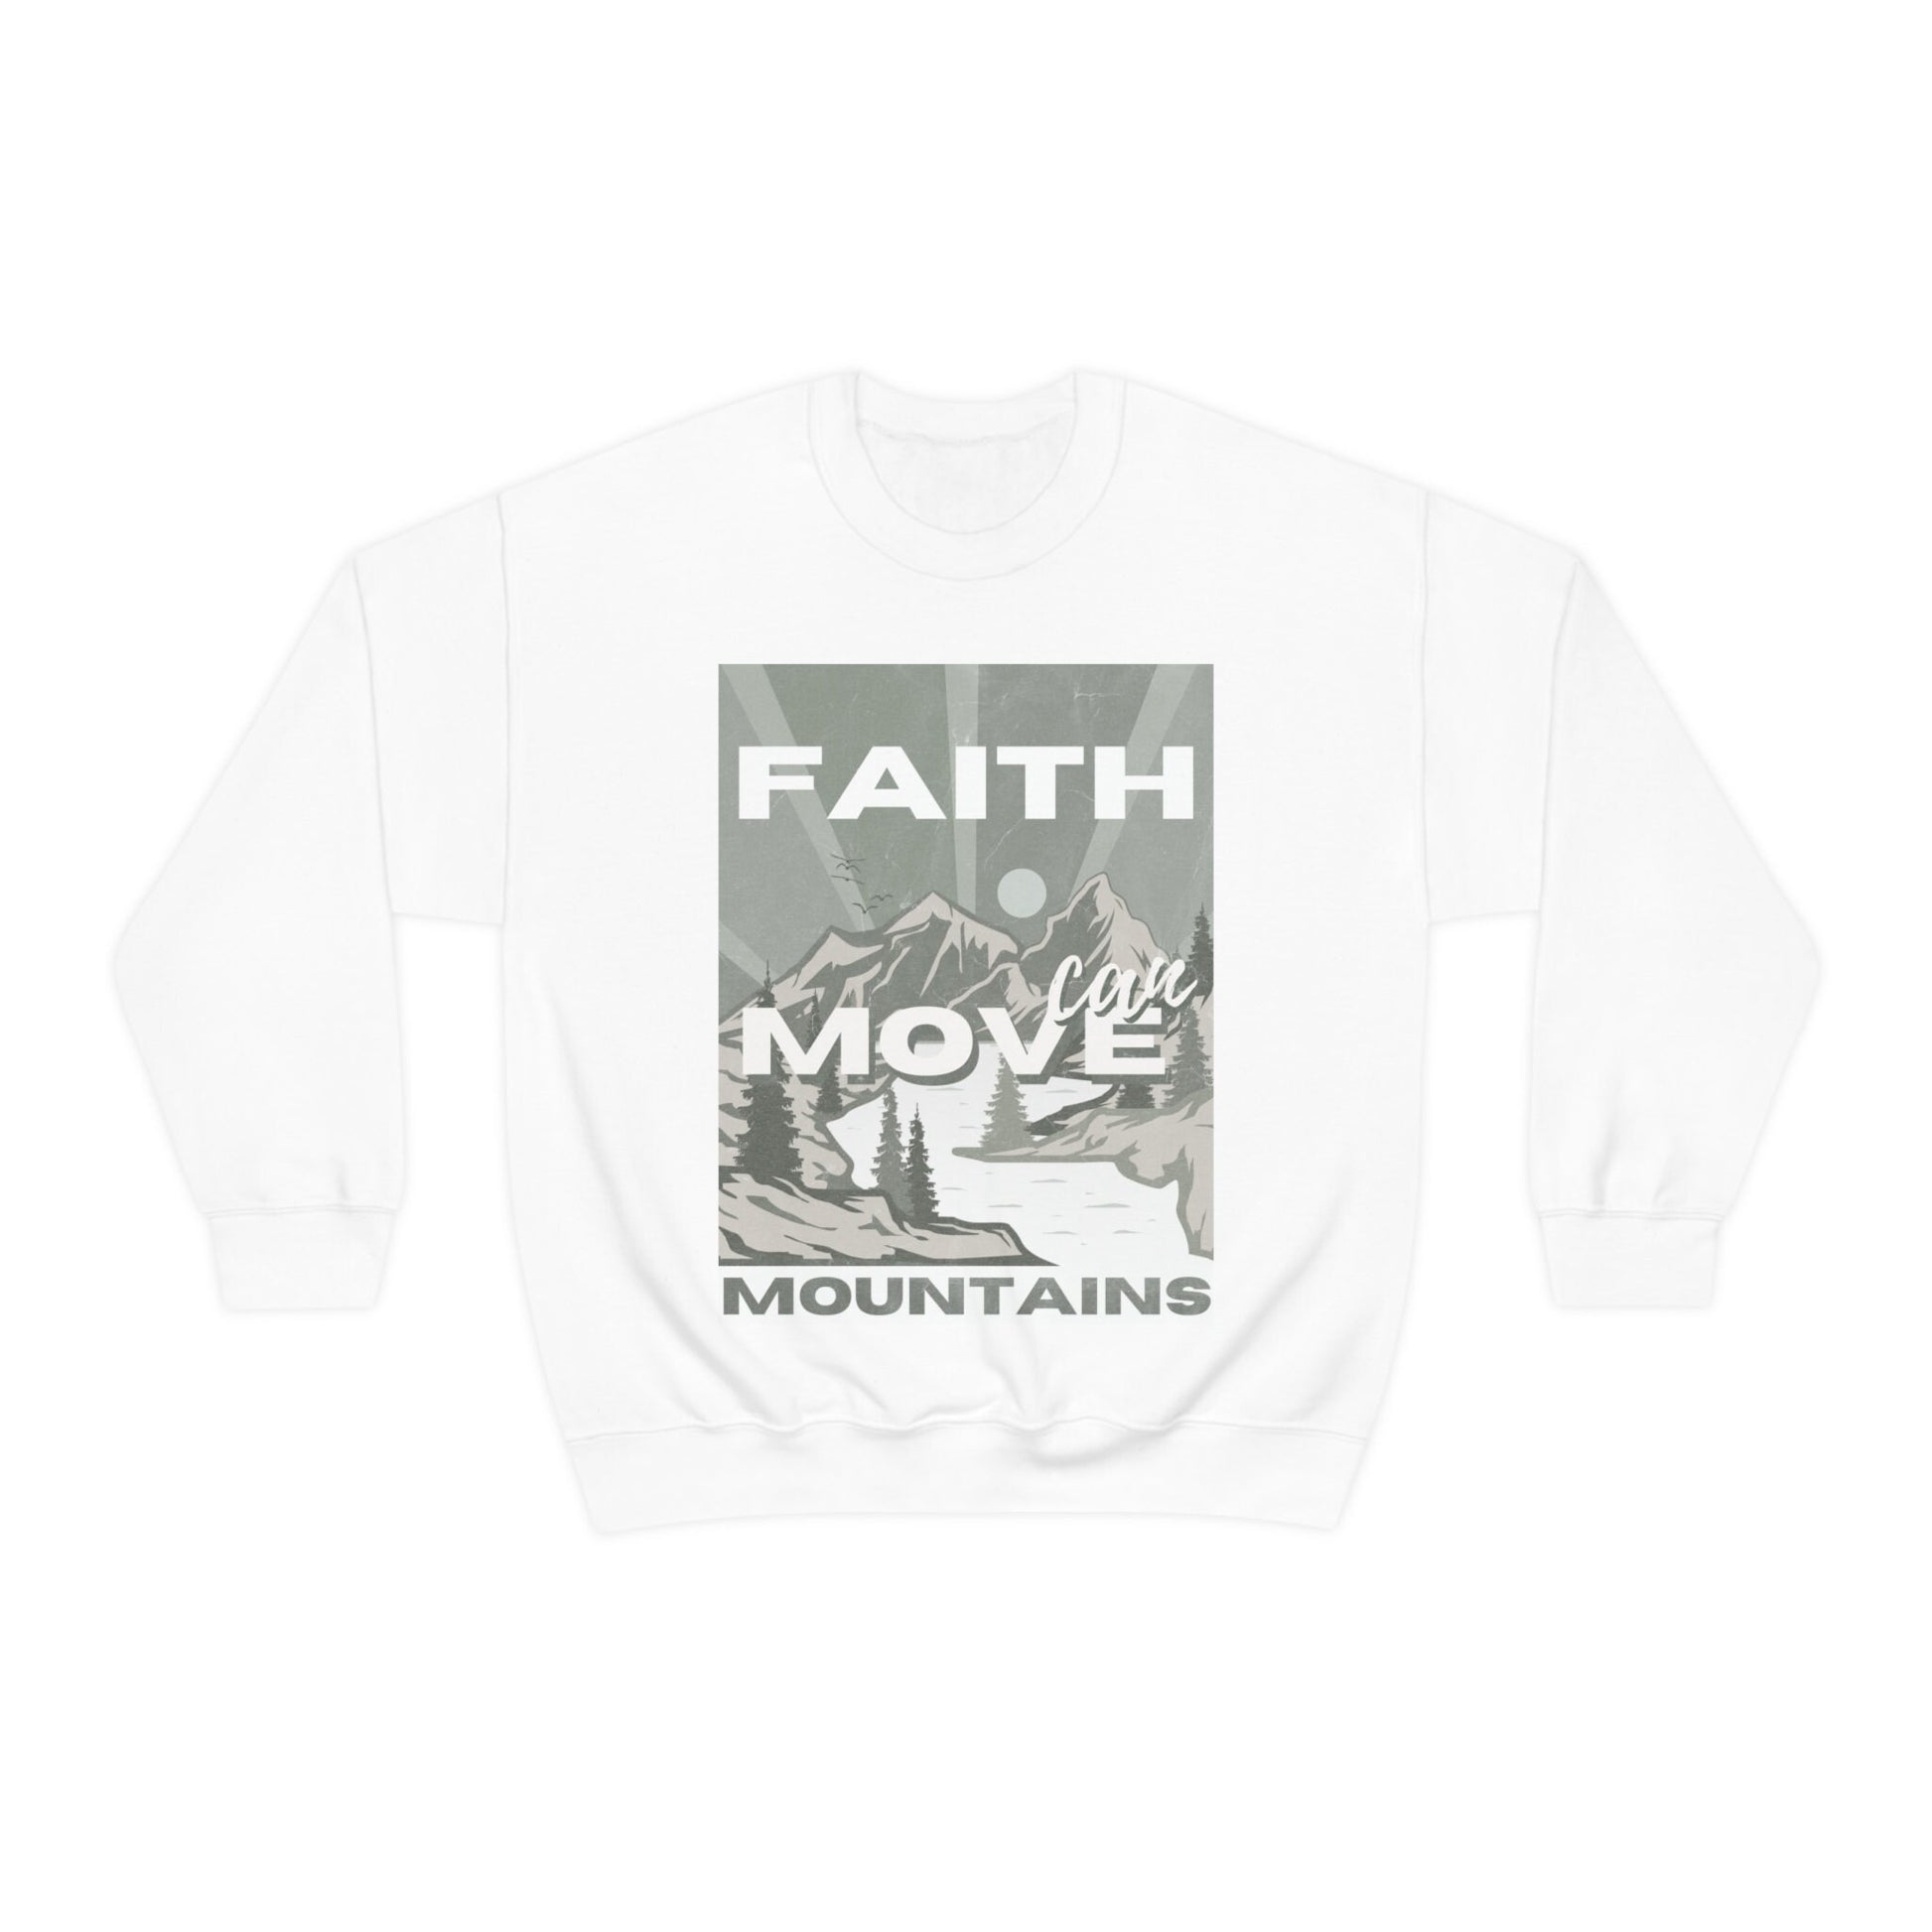 Faith can move Mountains pullover, Religious crew neck shirt, mountain shirt, PNW, Motivational T-Shirt, Christian Graphic Tee Gift